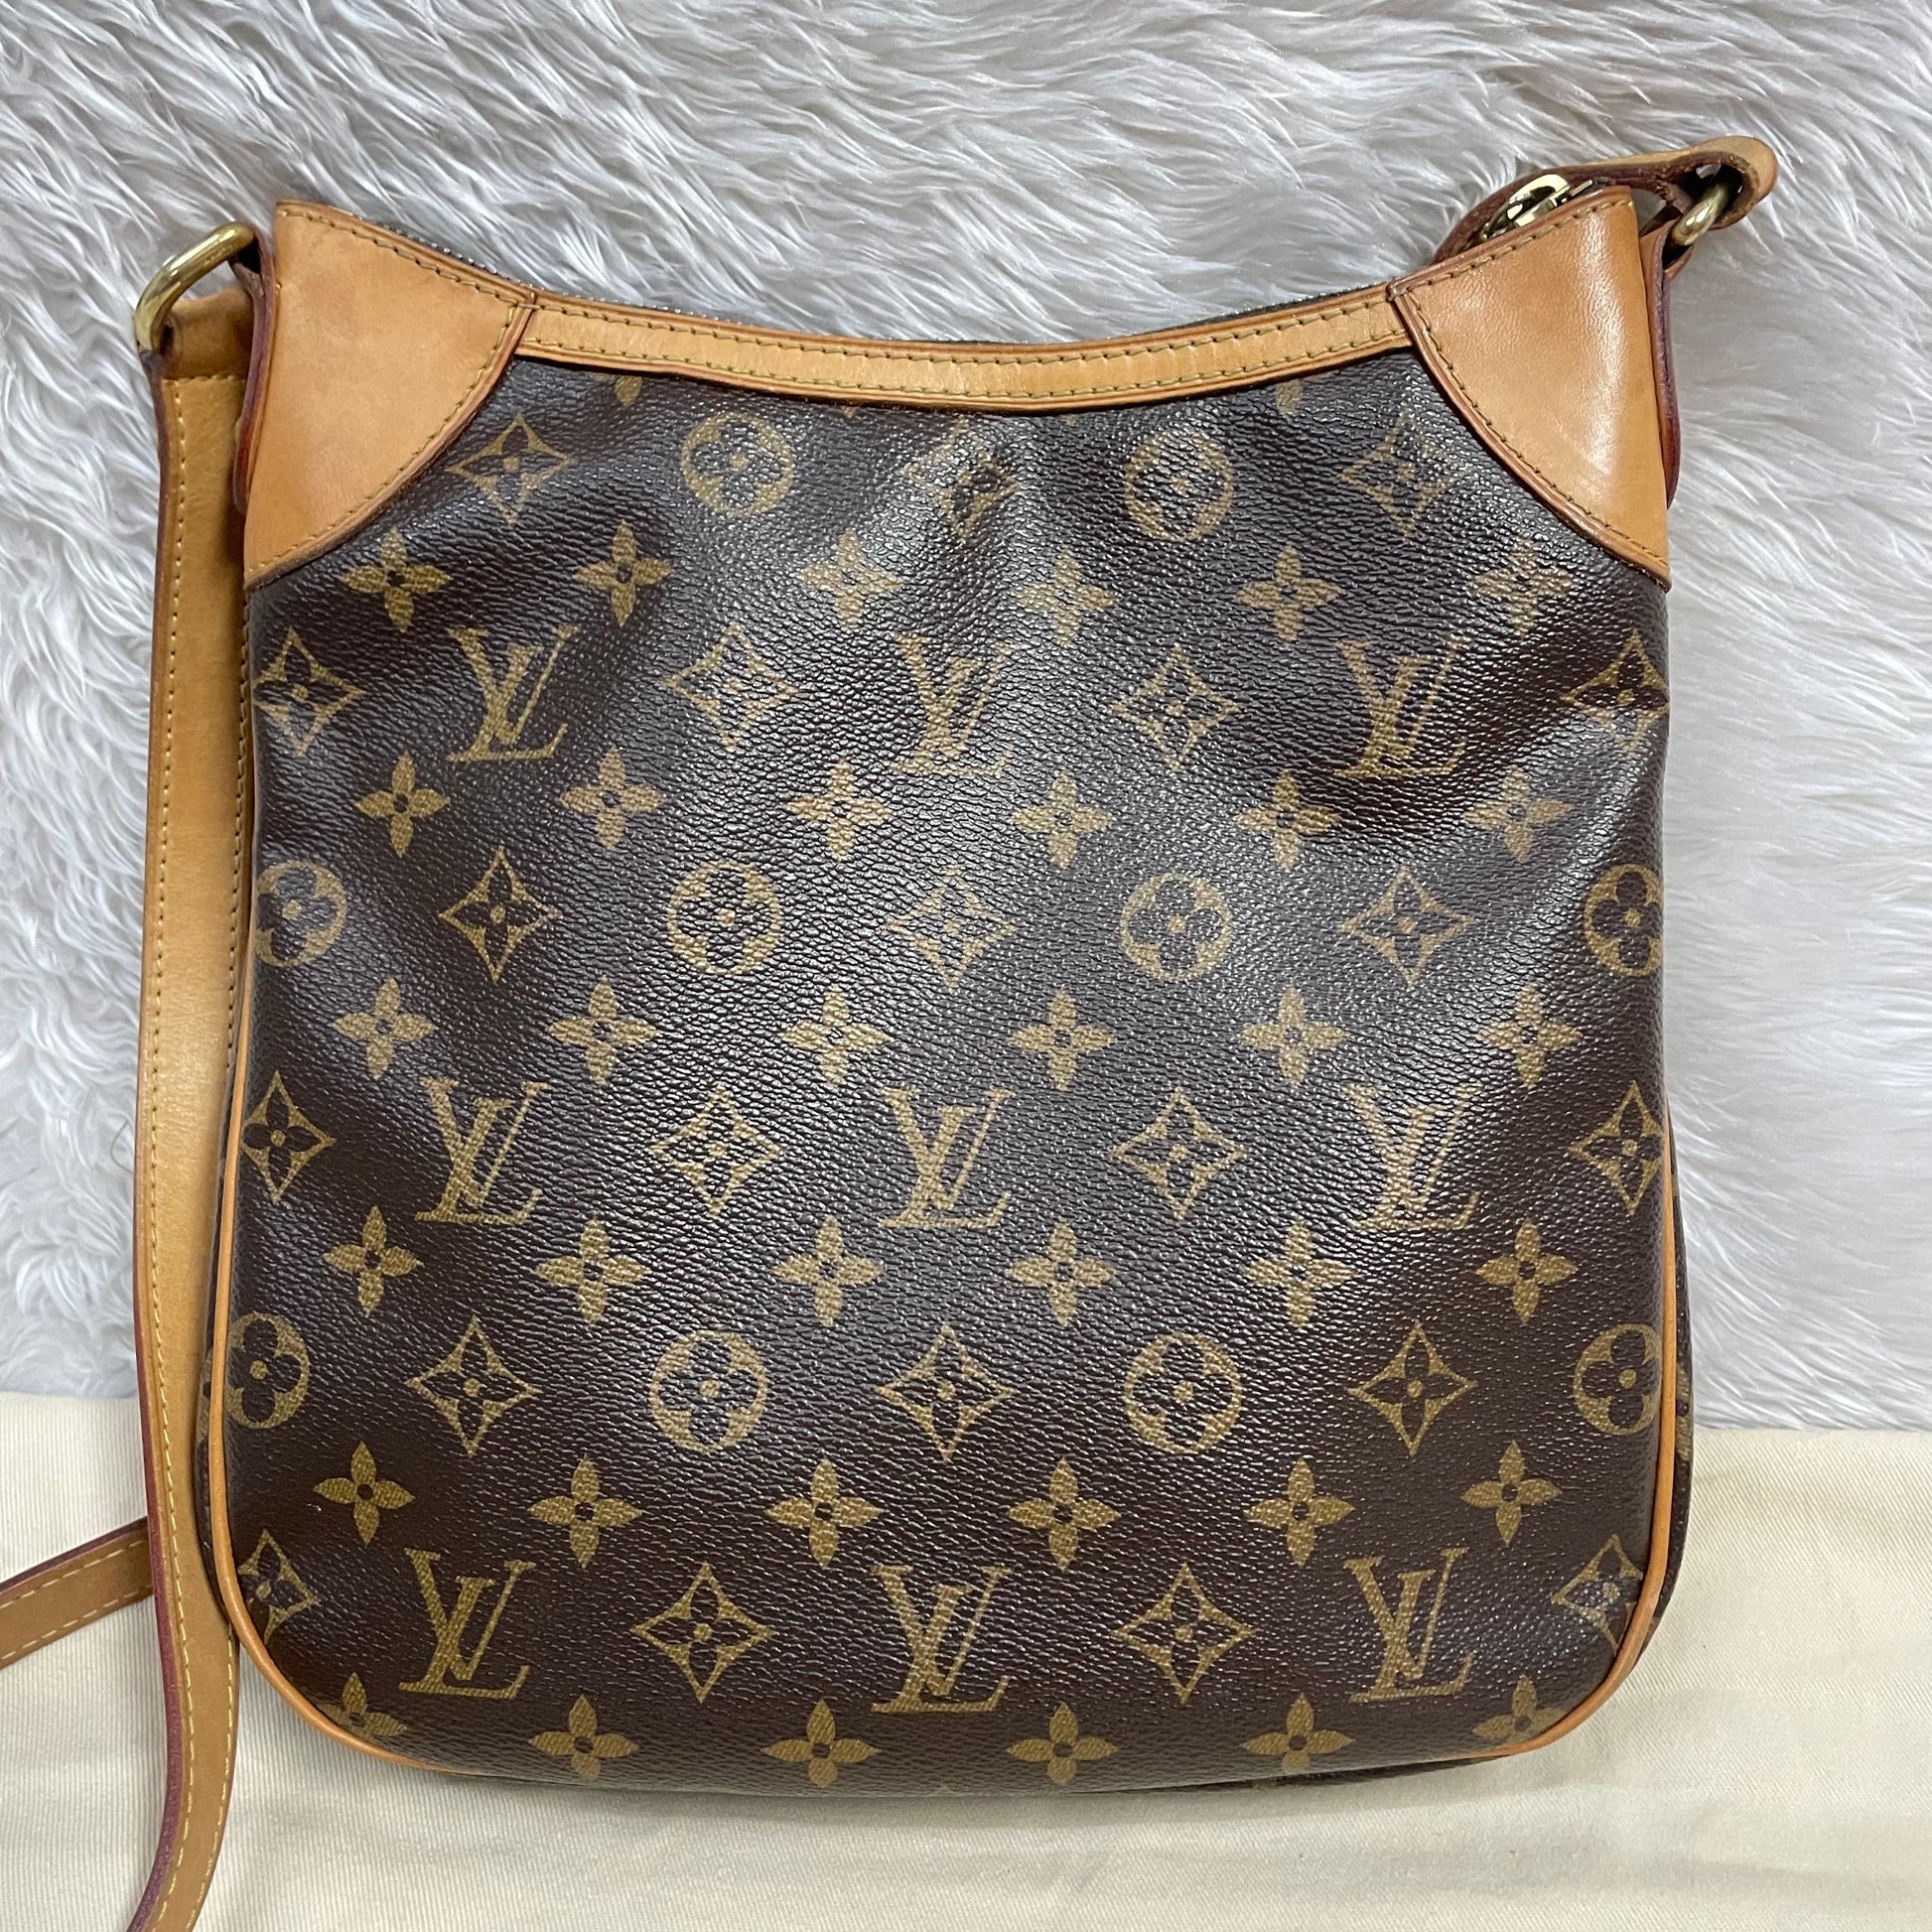 Authentic Odeon pm crossbody monogram in great condition with dust